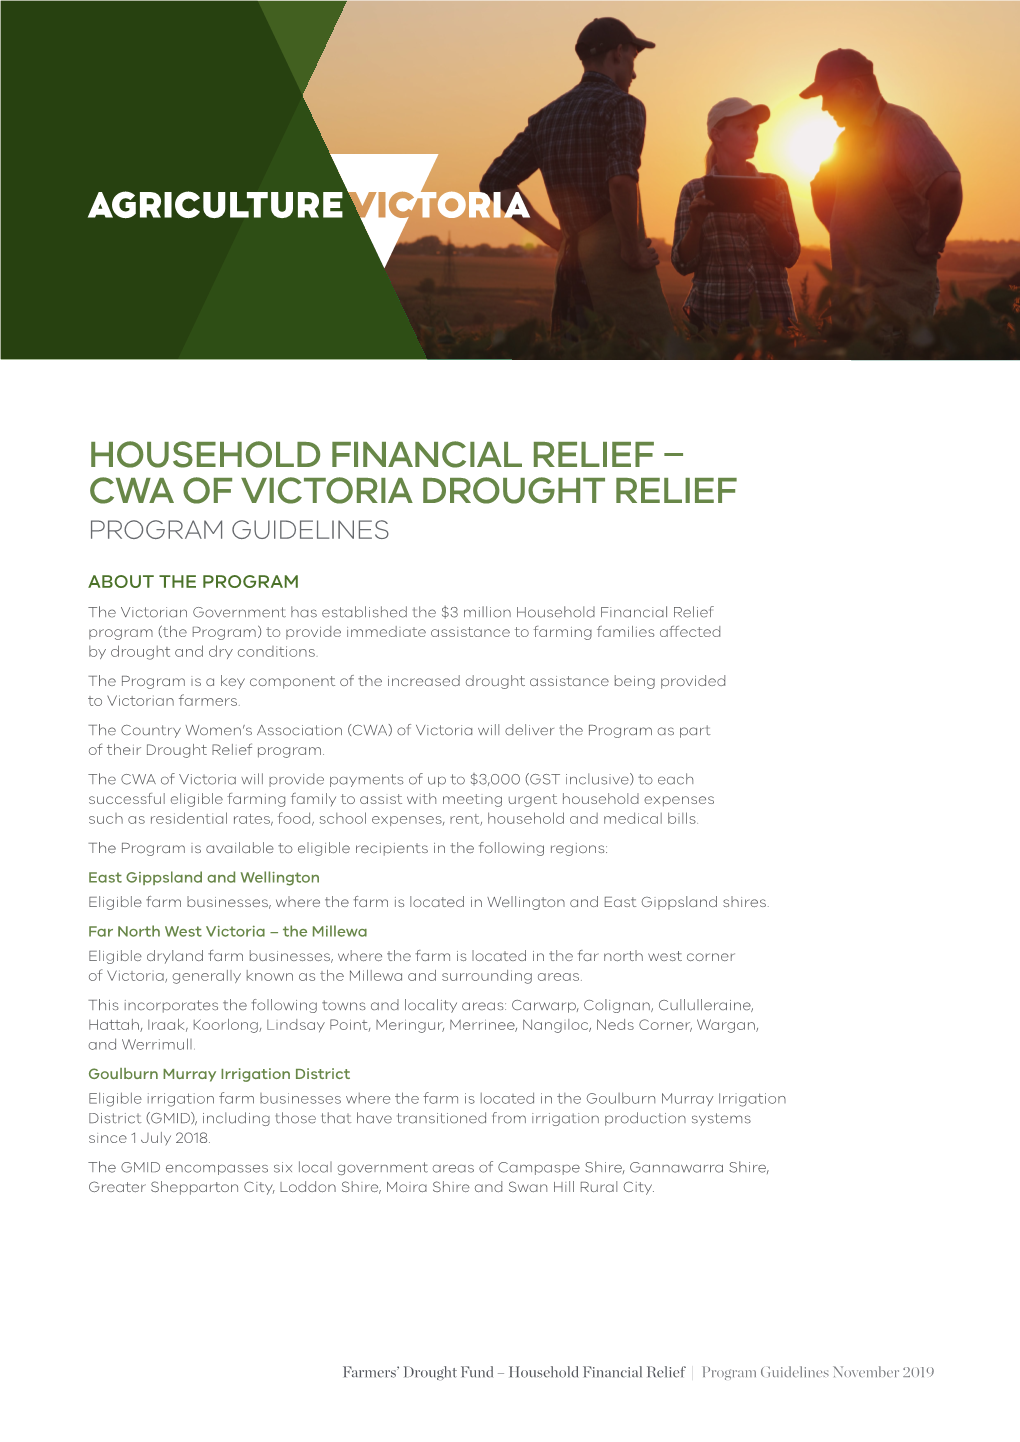 Household Financial Relief – Cwa of Victoria Drought Relief Program Guidelines